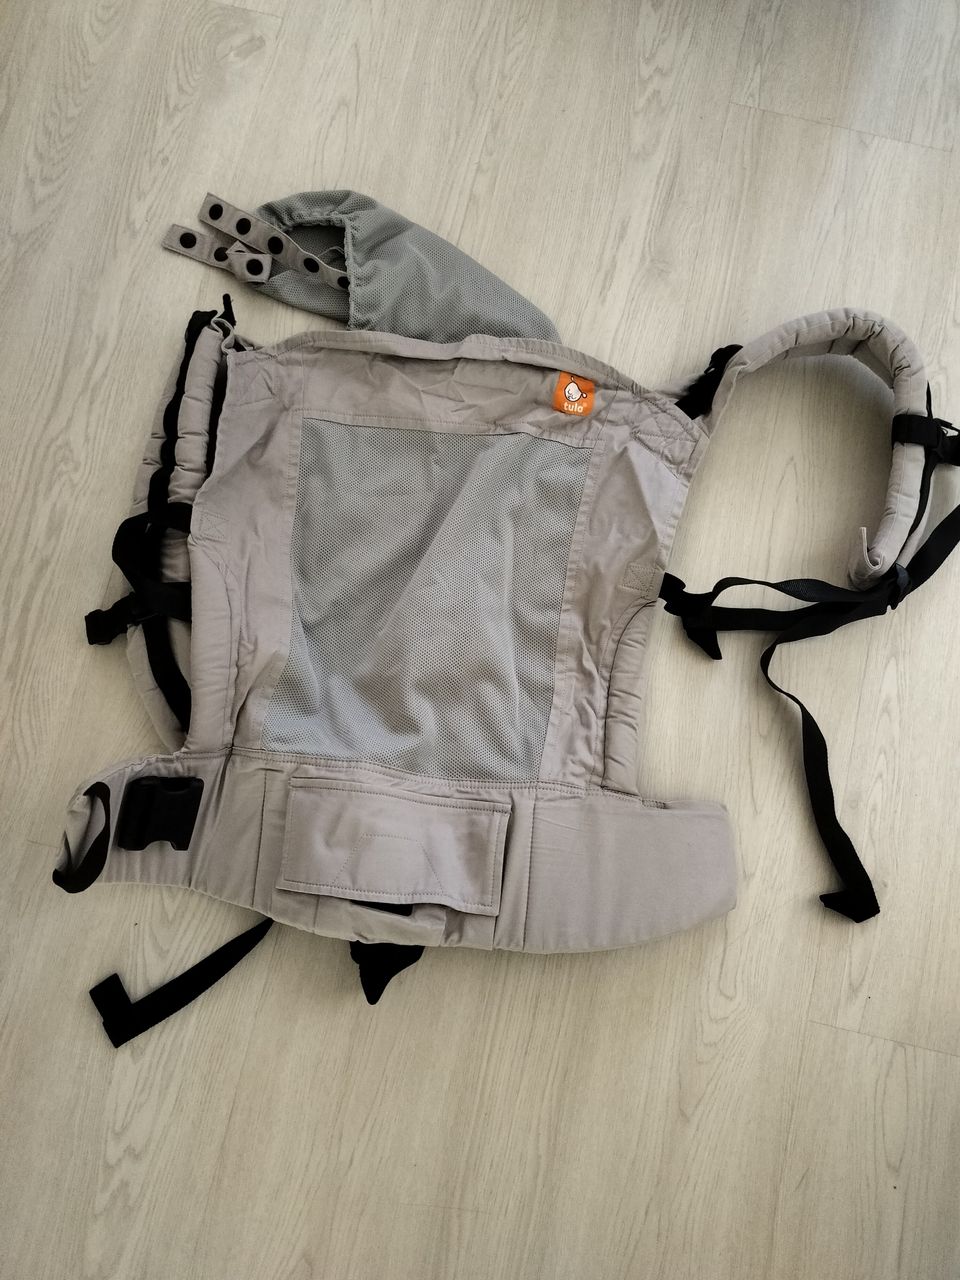 Tula toddler carrier